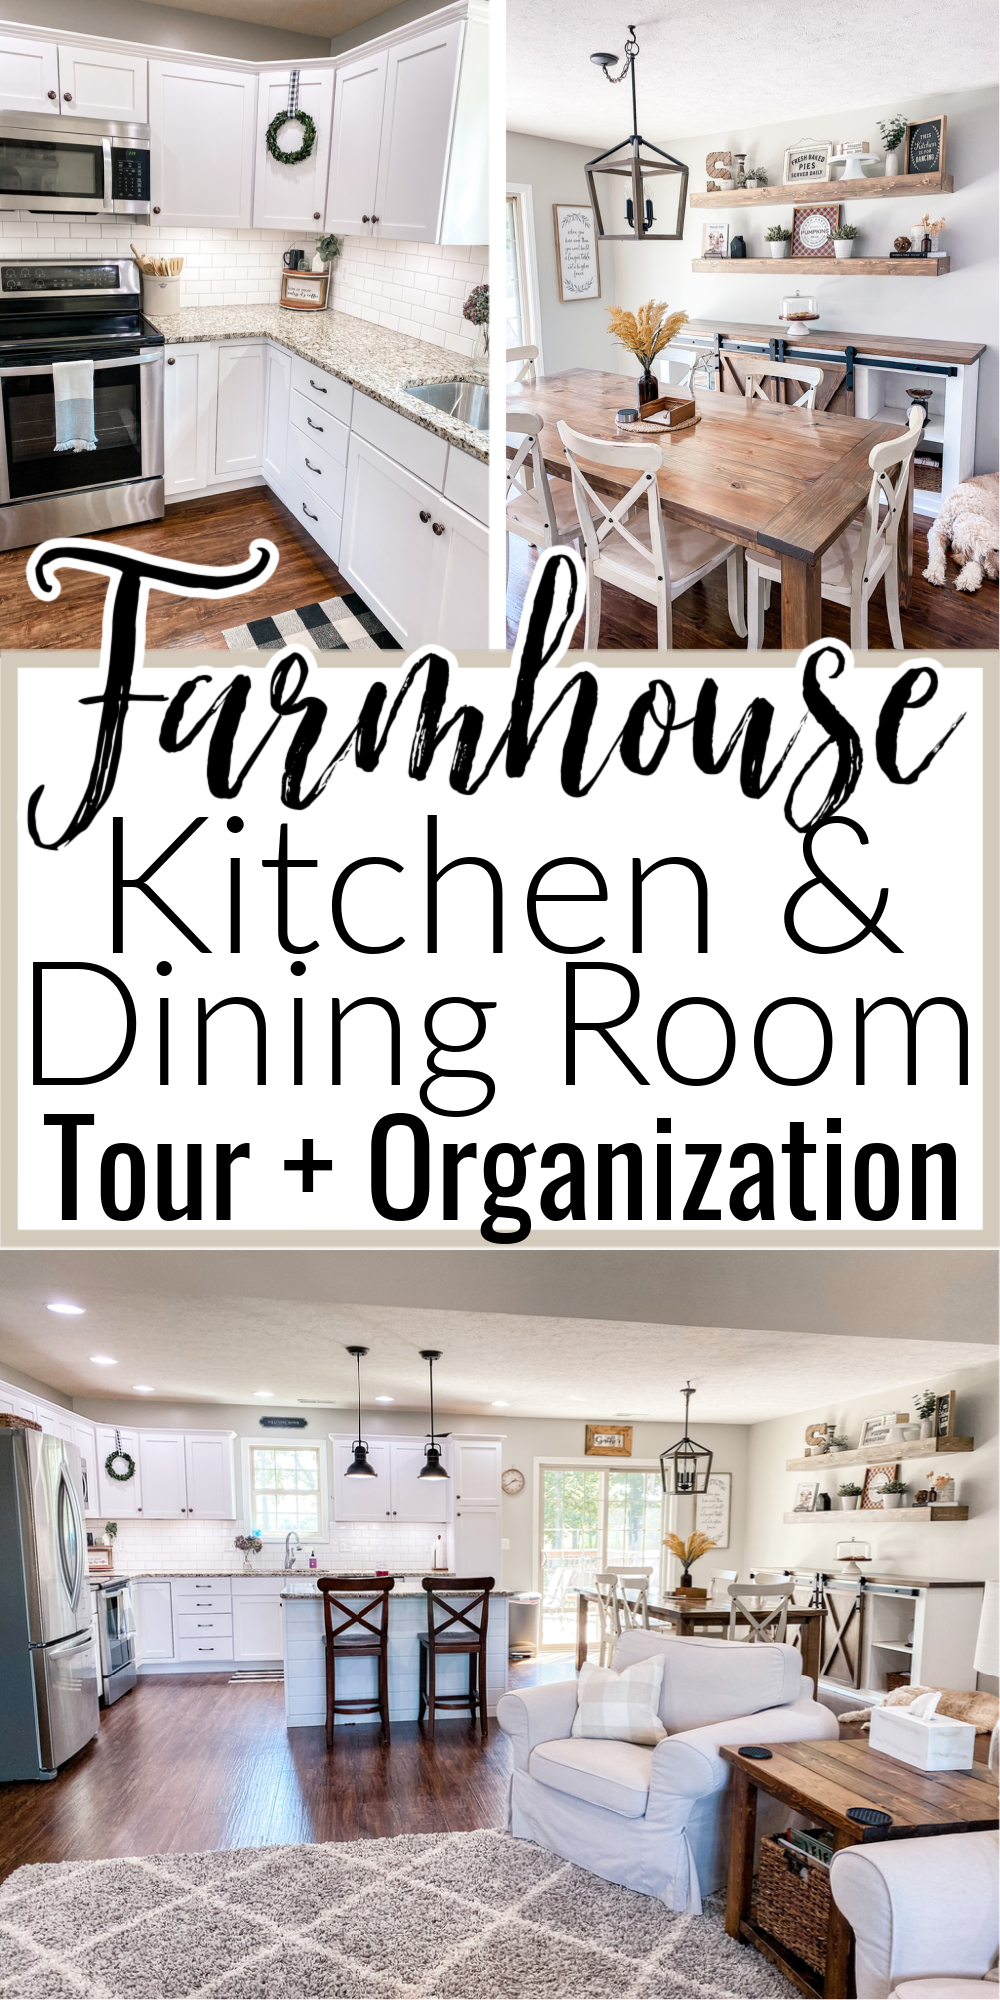 https://www.thesimplyorganizedhome.com/wp-content/uploads/2020/08/Farmhouse-Kitchen-Dining-Room-Tour-BLOG-POST.png